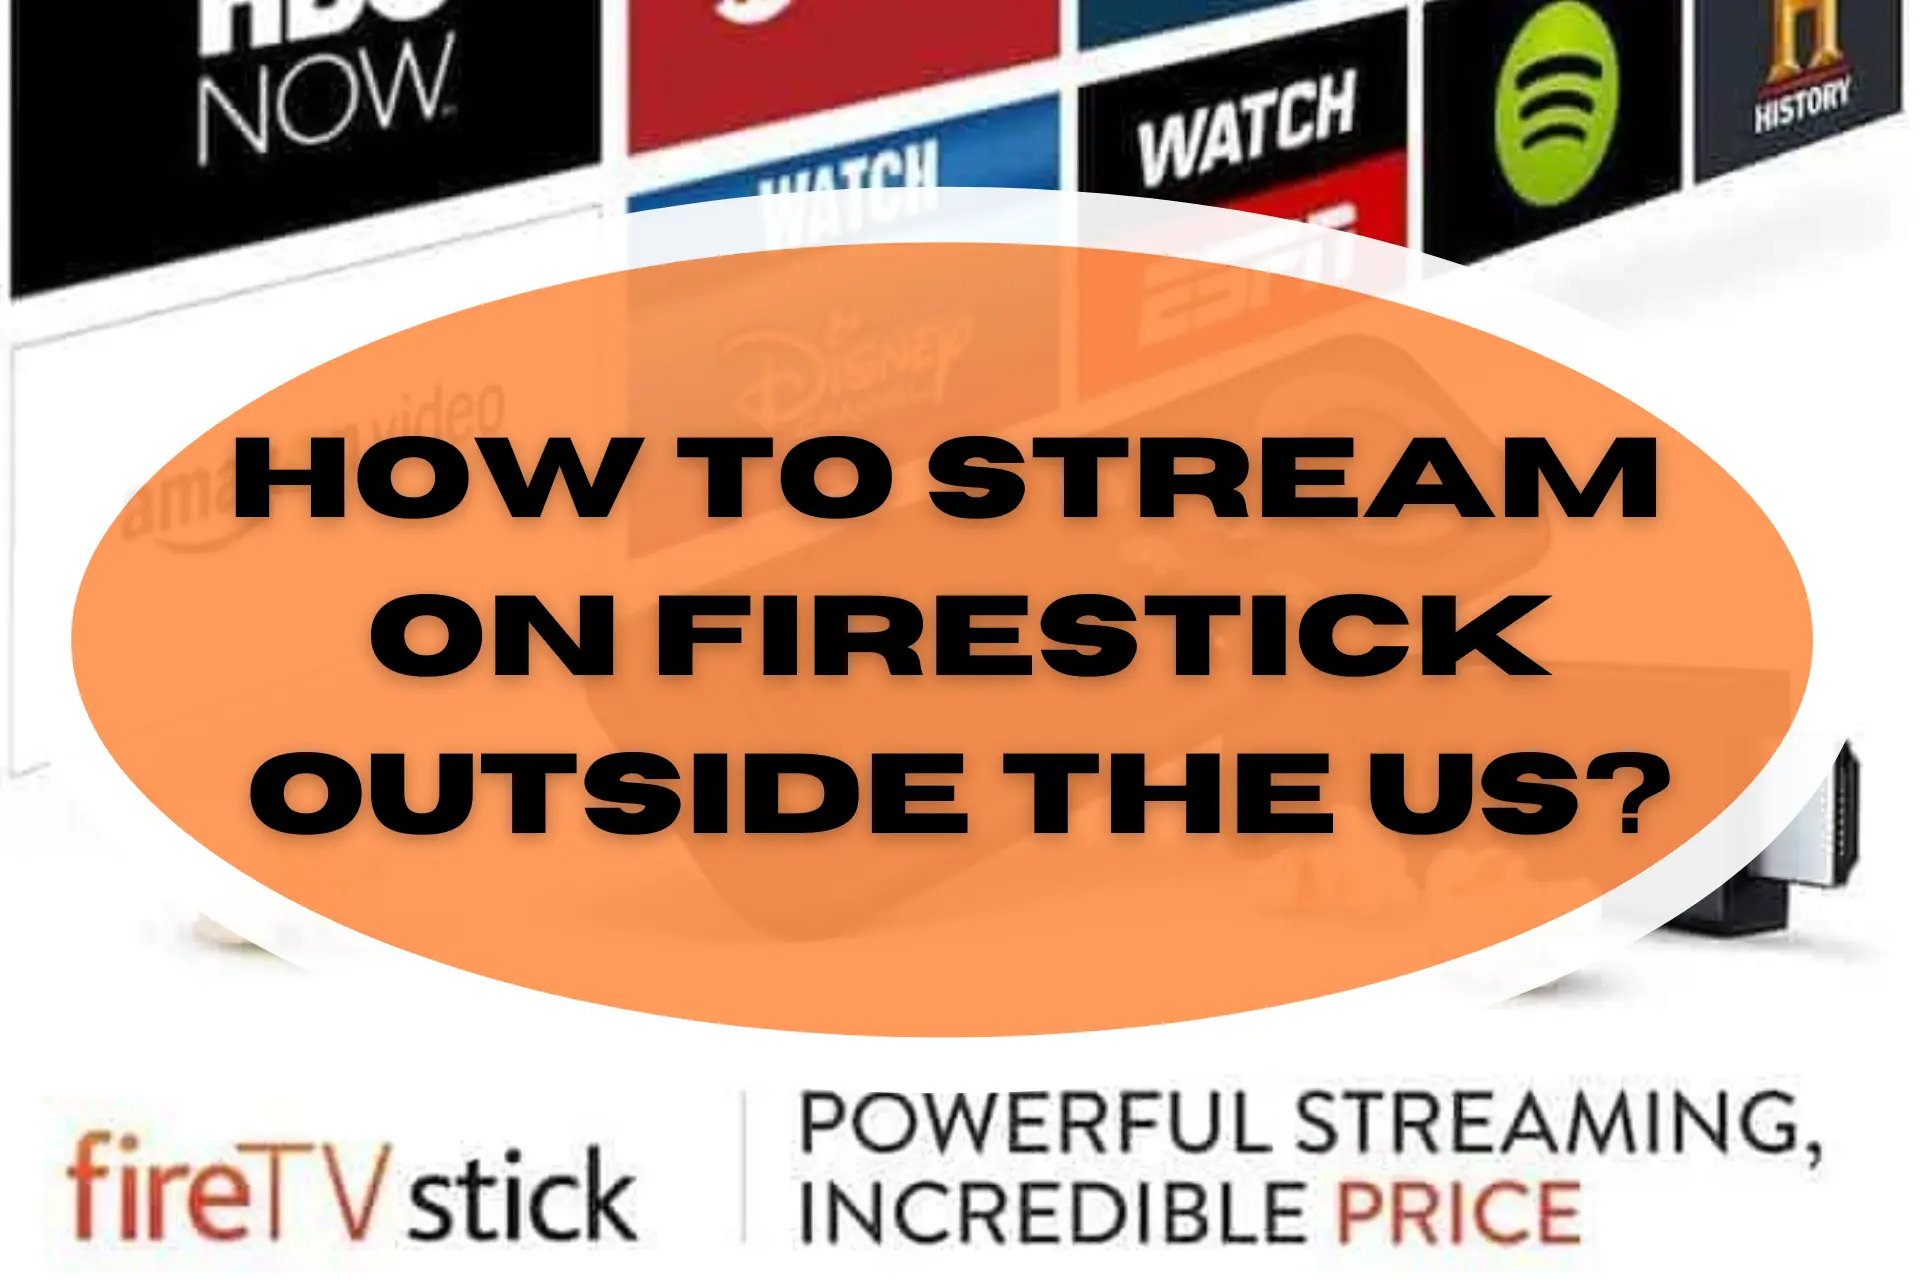 How to Stream on Firestick Outside the US